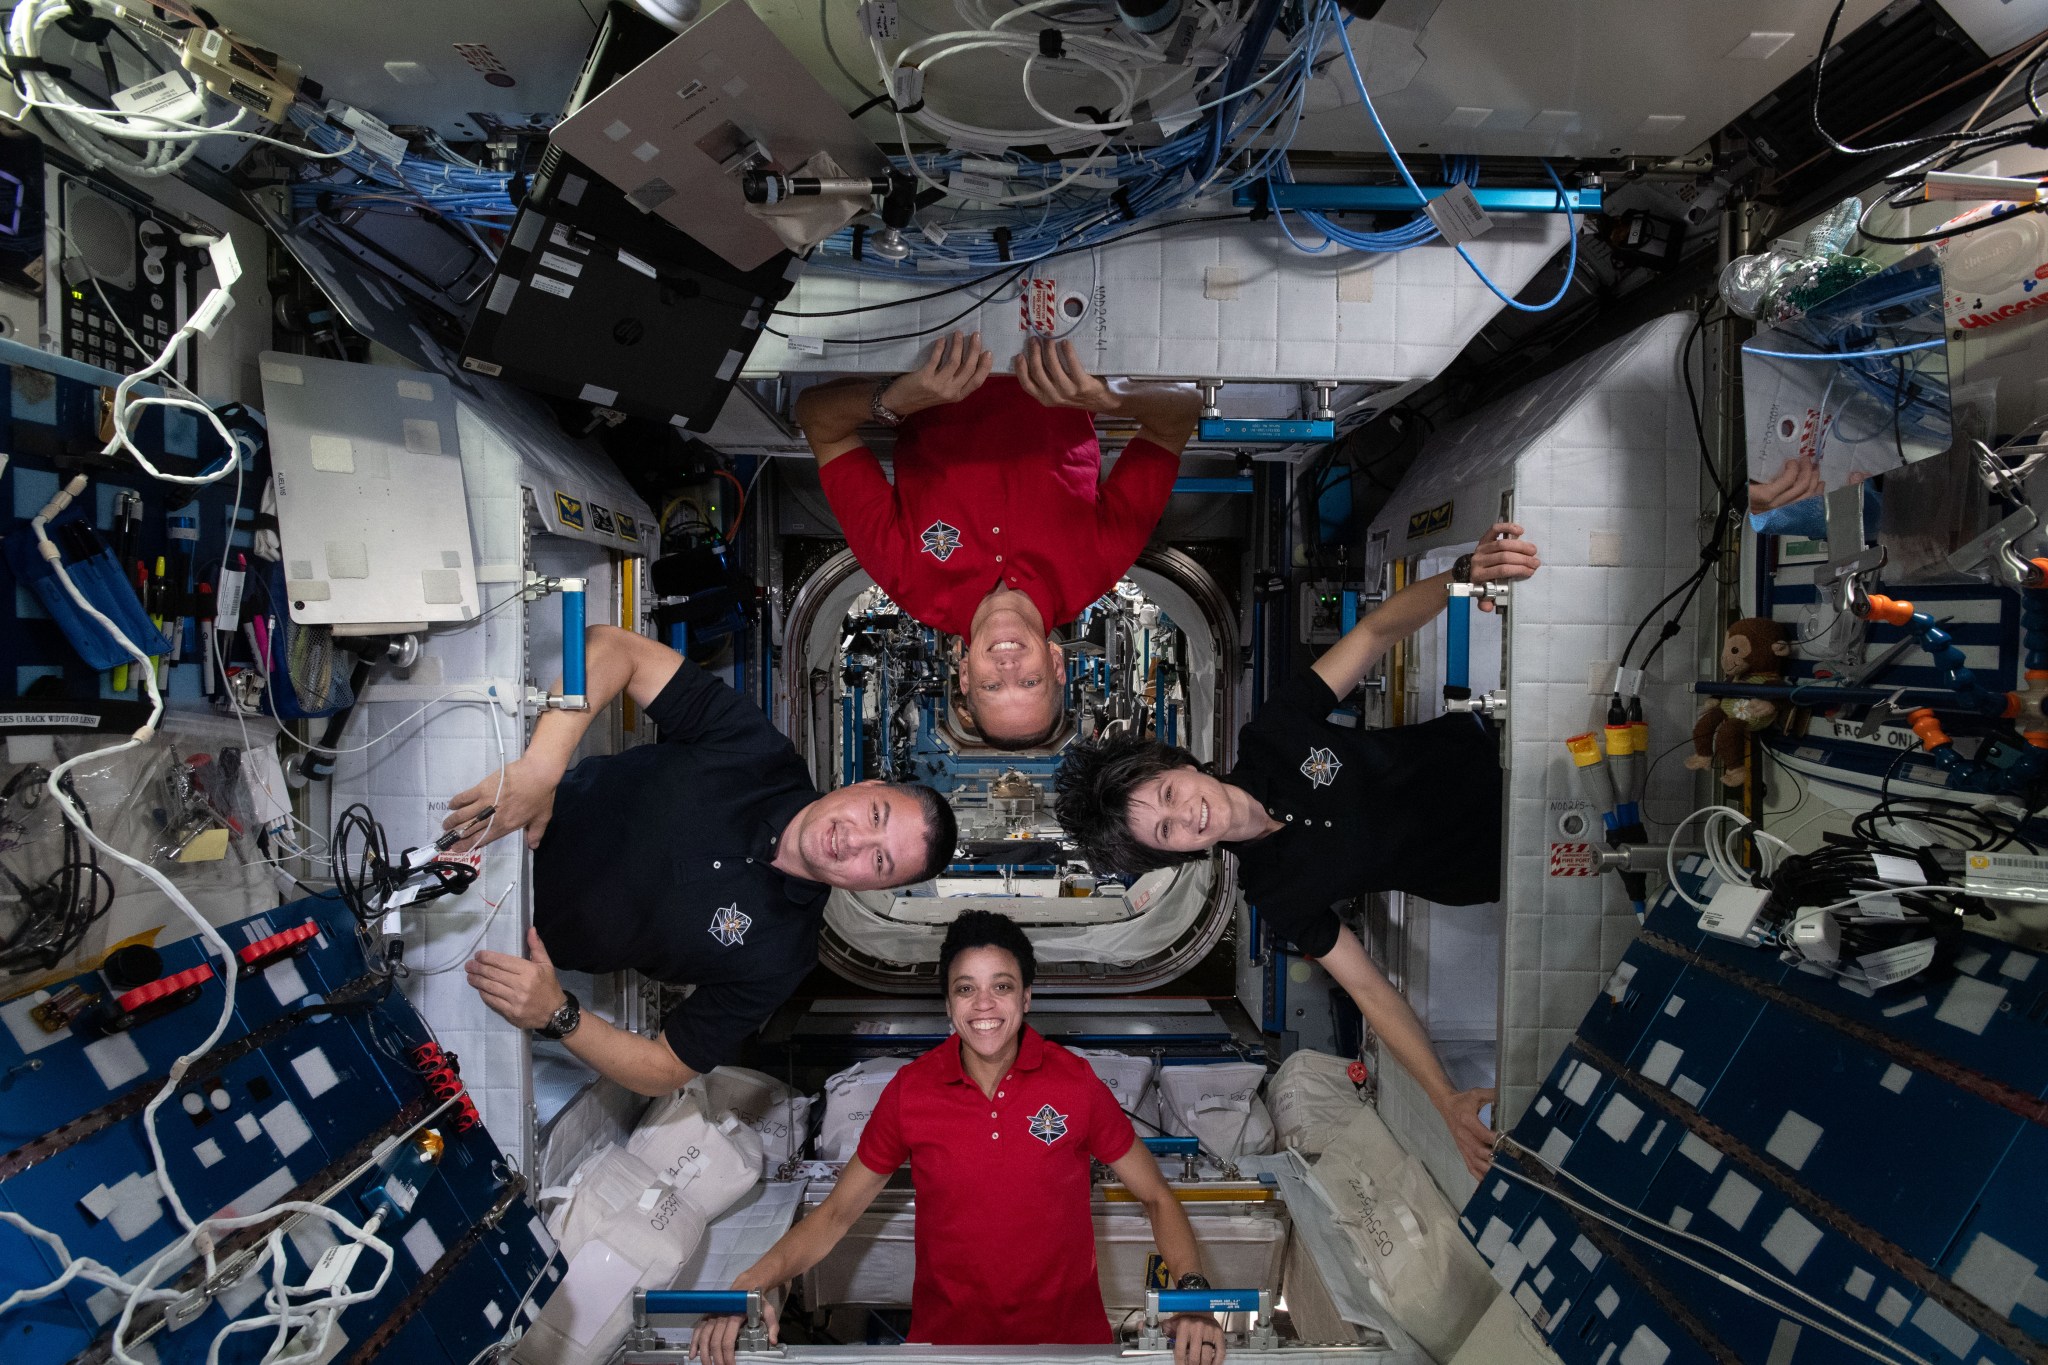 Expedition 67 Flight Engineers (clockwise from bottom) Jessica Watkins, Kjell Lindgren, and Bob Hines, all from NASA, and Samantha Cristoforetti of ESA (European Space Agency)